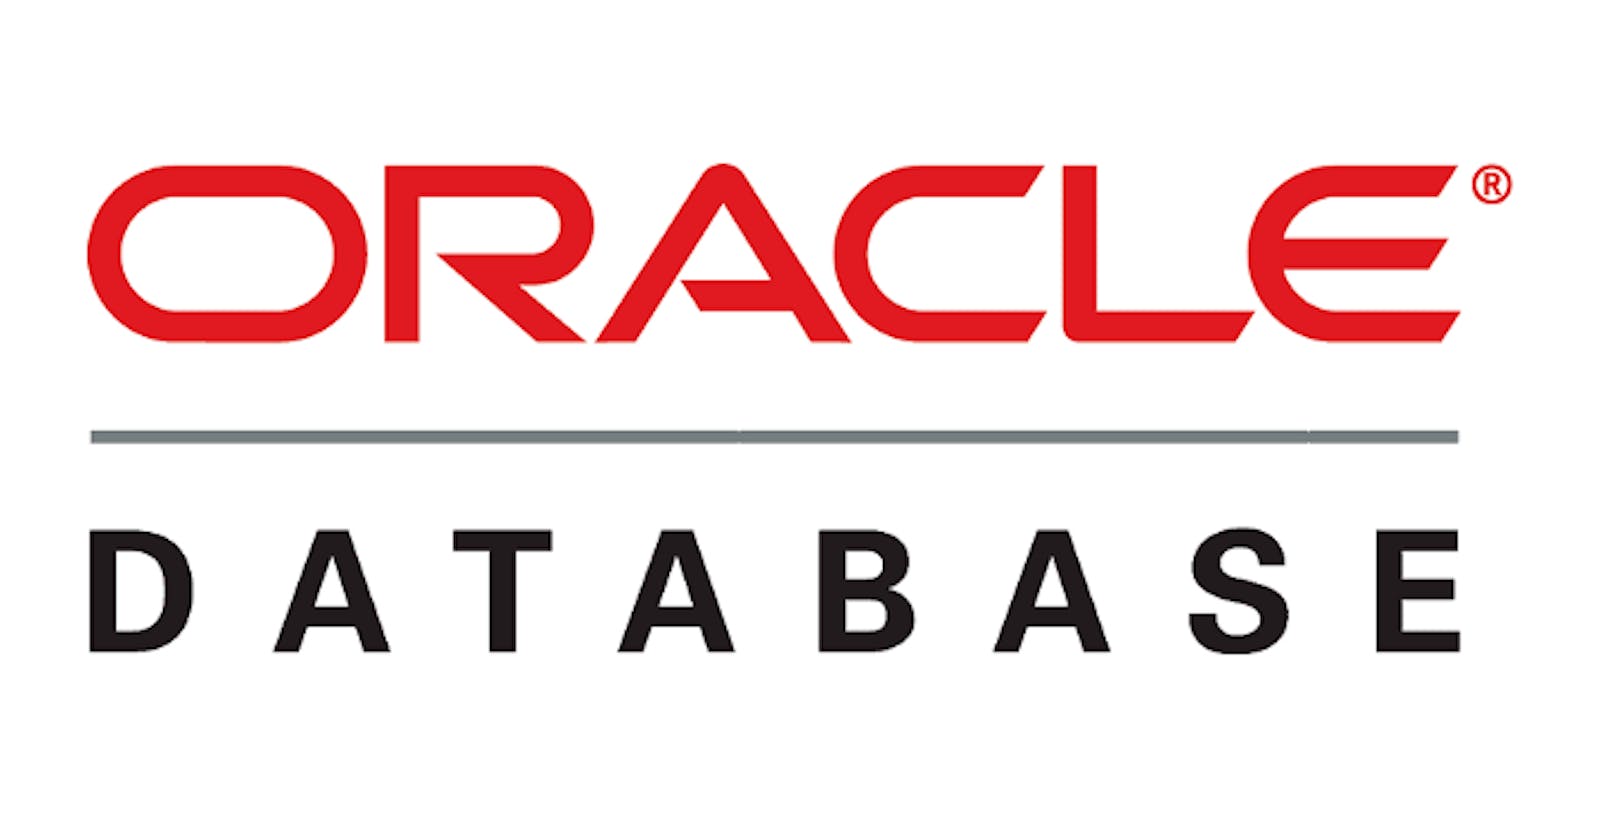 How to setup Oracle Database 11g XE on Windows and unlock the "HR" user